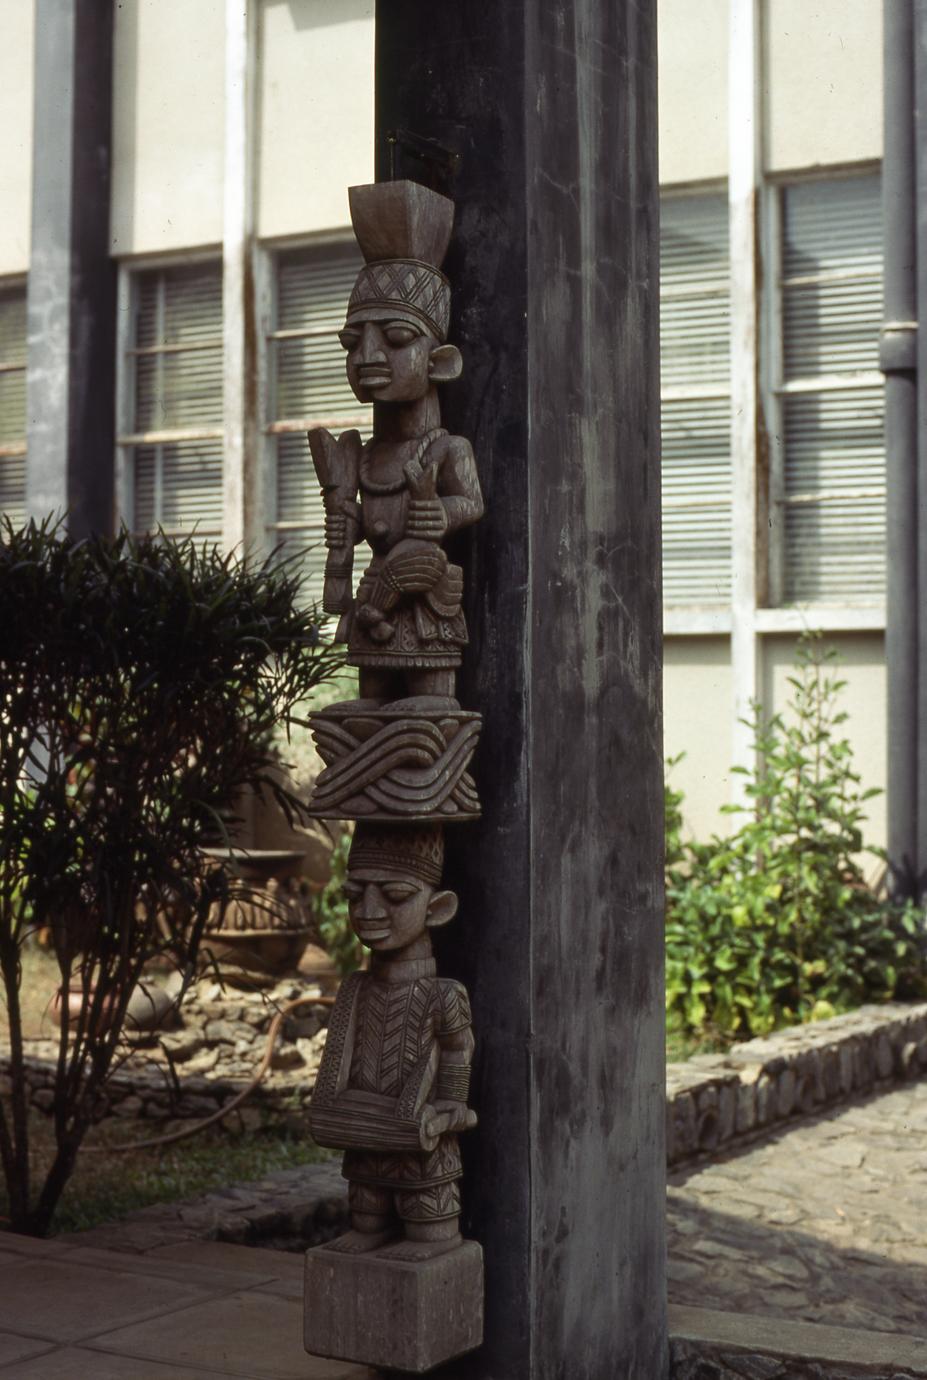 House post at the Institute of African Studies